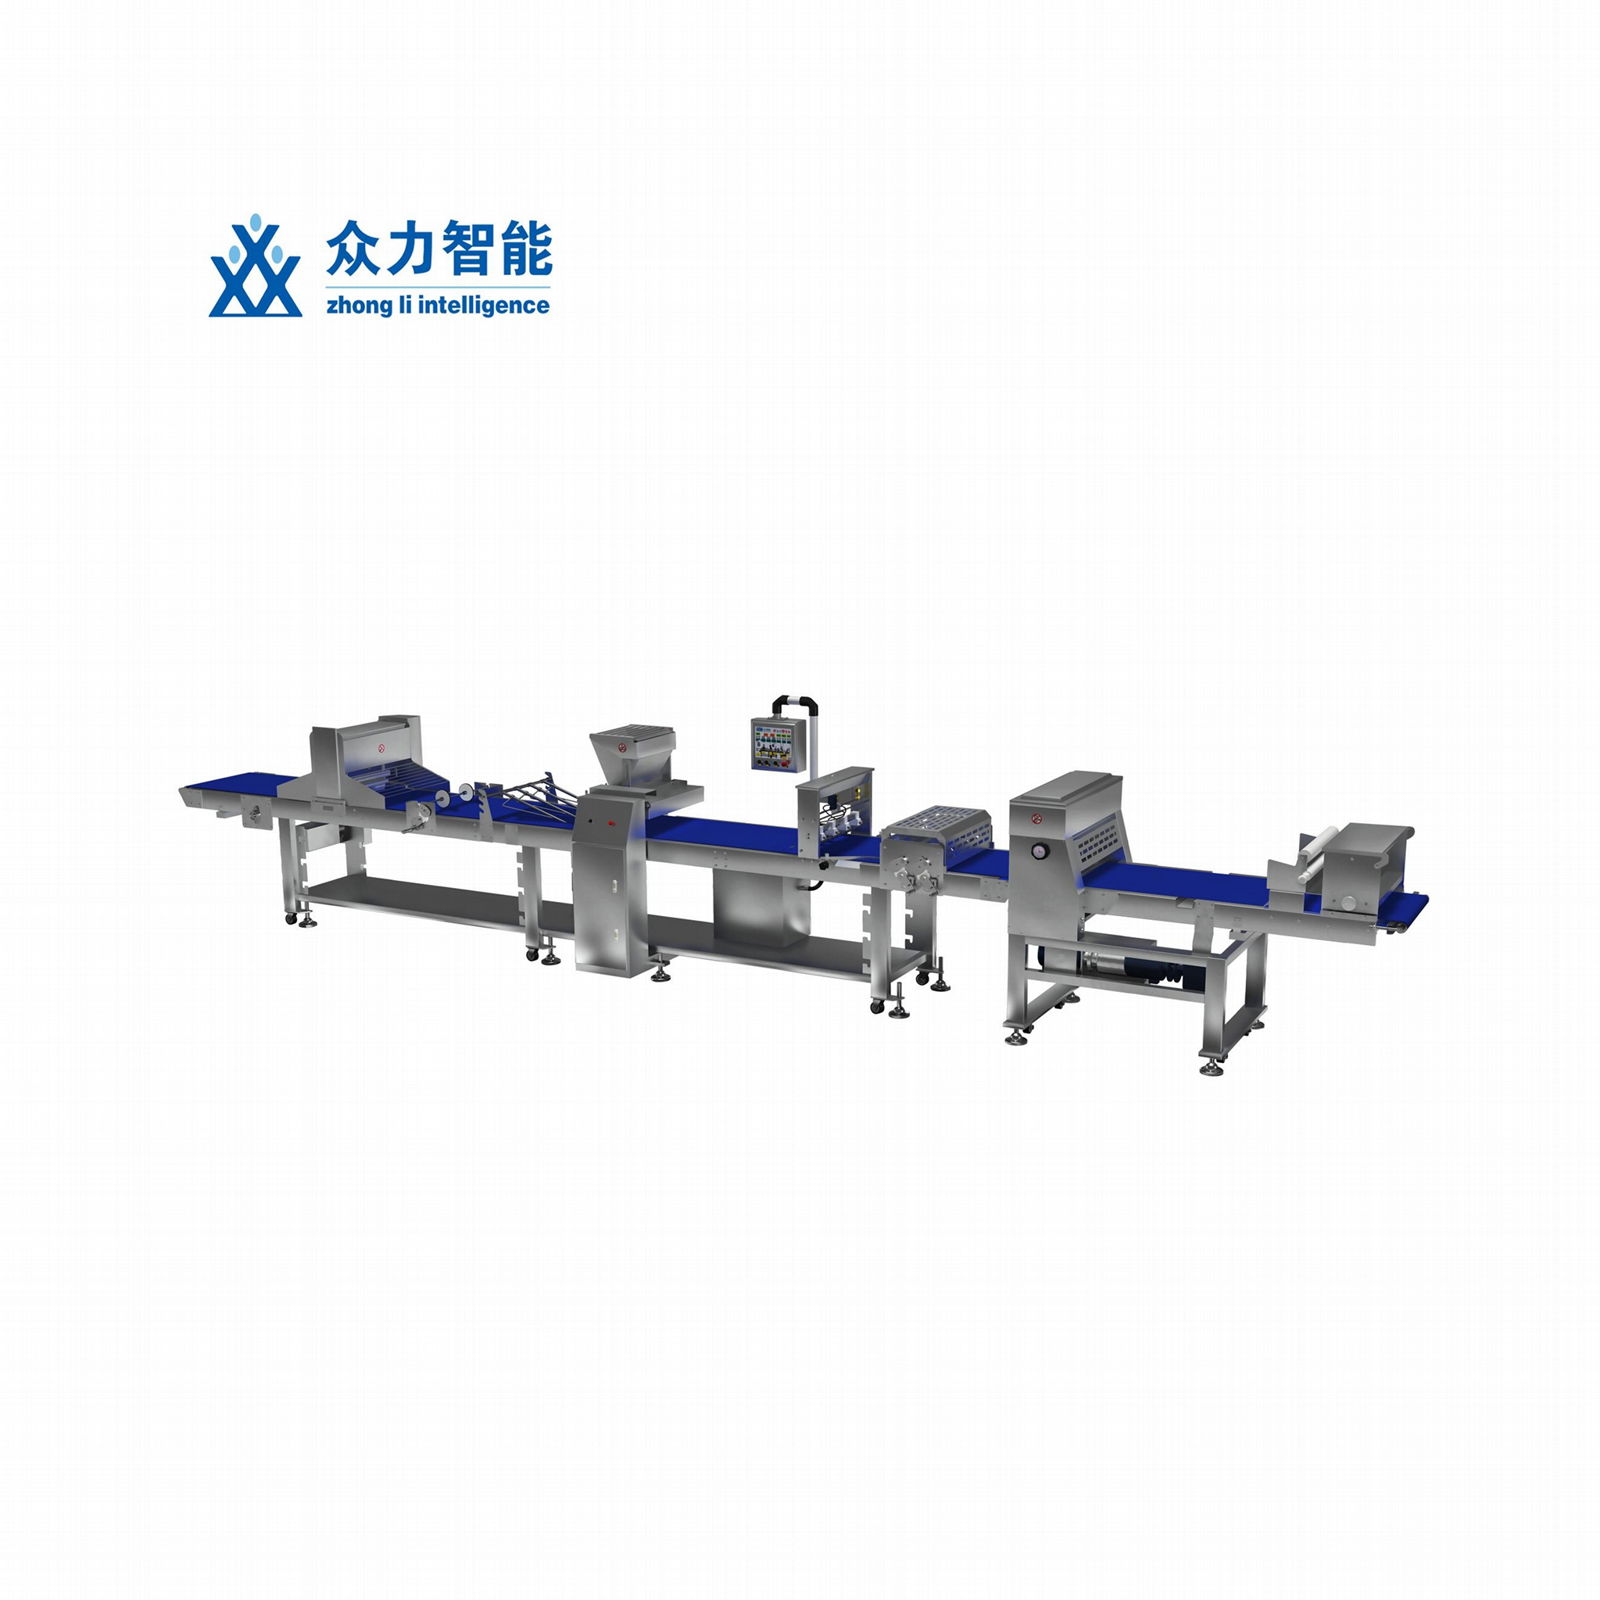 Automatic pastry forming equipment 